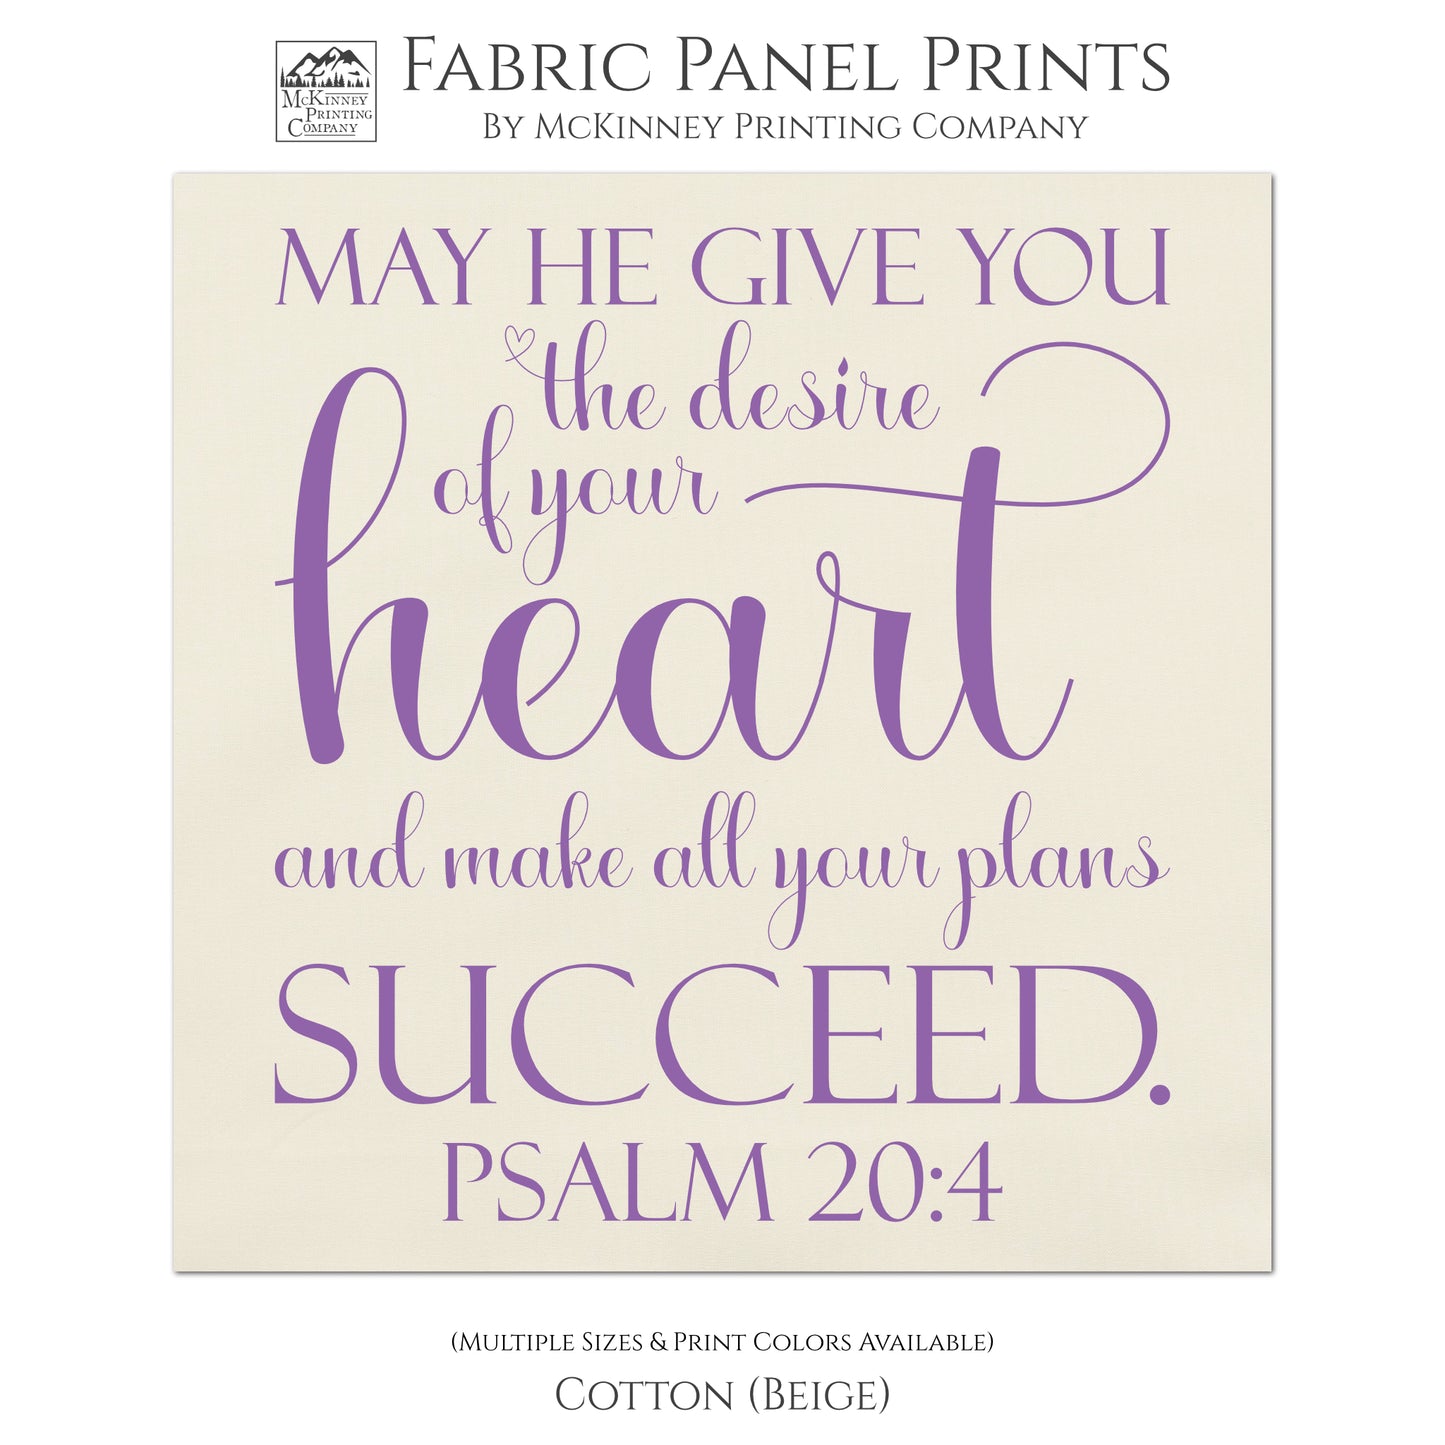 May He give you the desire of your heart and make all your plans succeed - Psalm 20:4 - Religious Fabric, Wall Hanging, Quilt Block, Sewing Craft, Pillow - Cotton